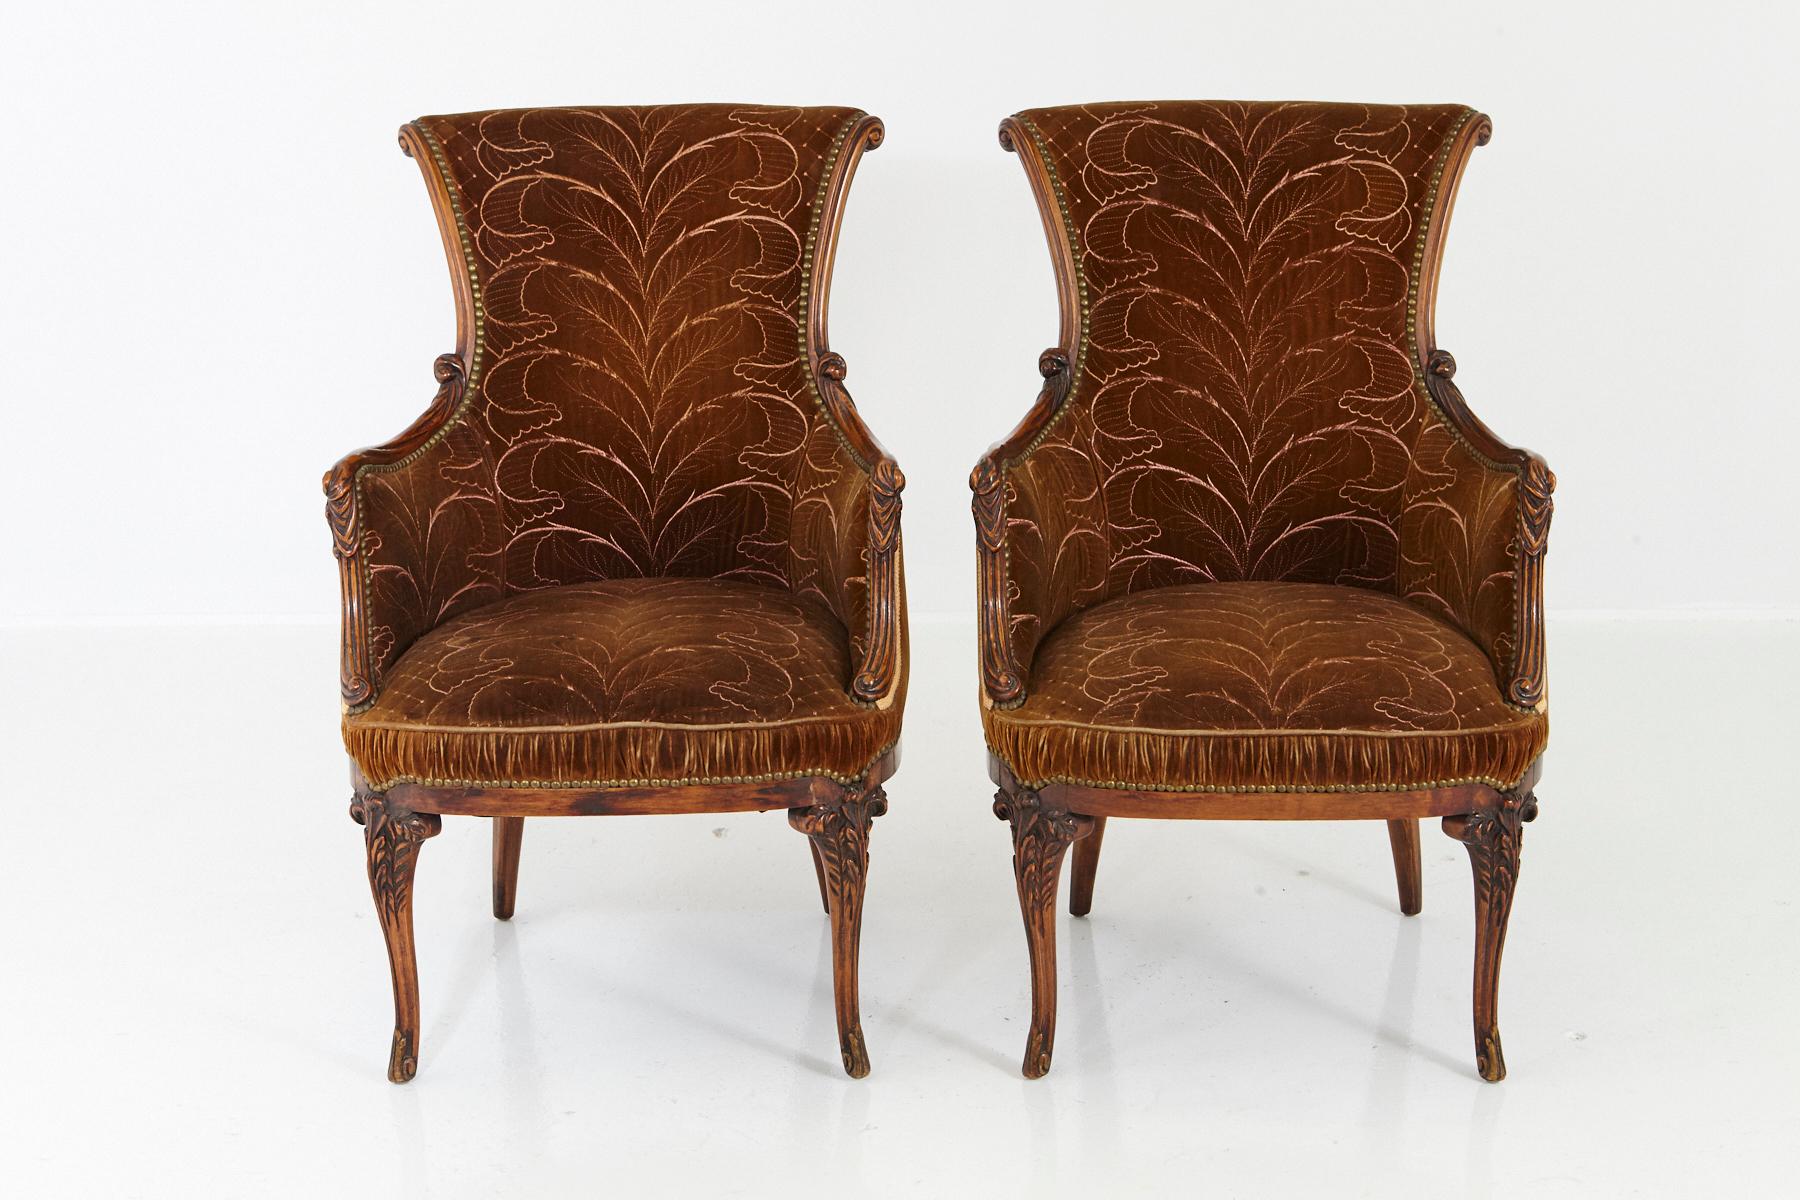 Pair of French Art Nouveau Armchairs, Two-Tone Cognac Colored Embroidered Velvet 1